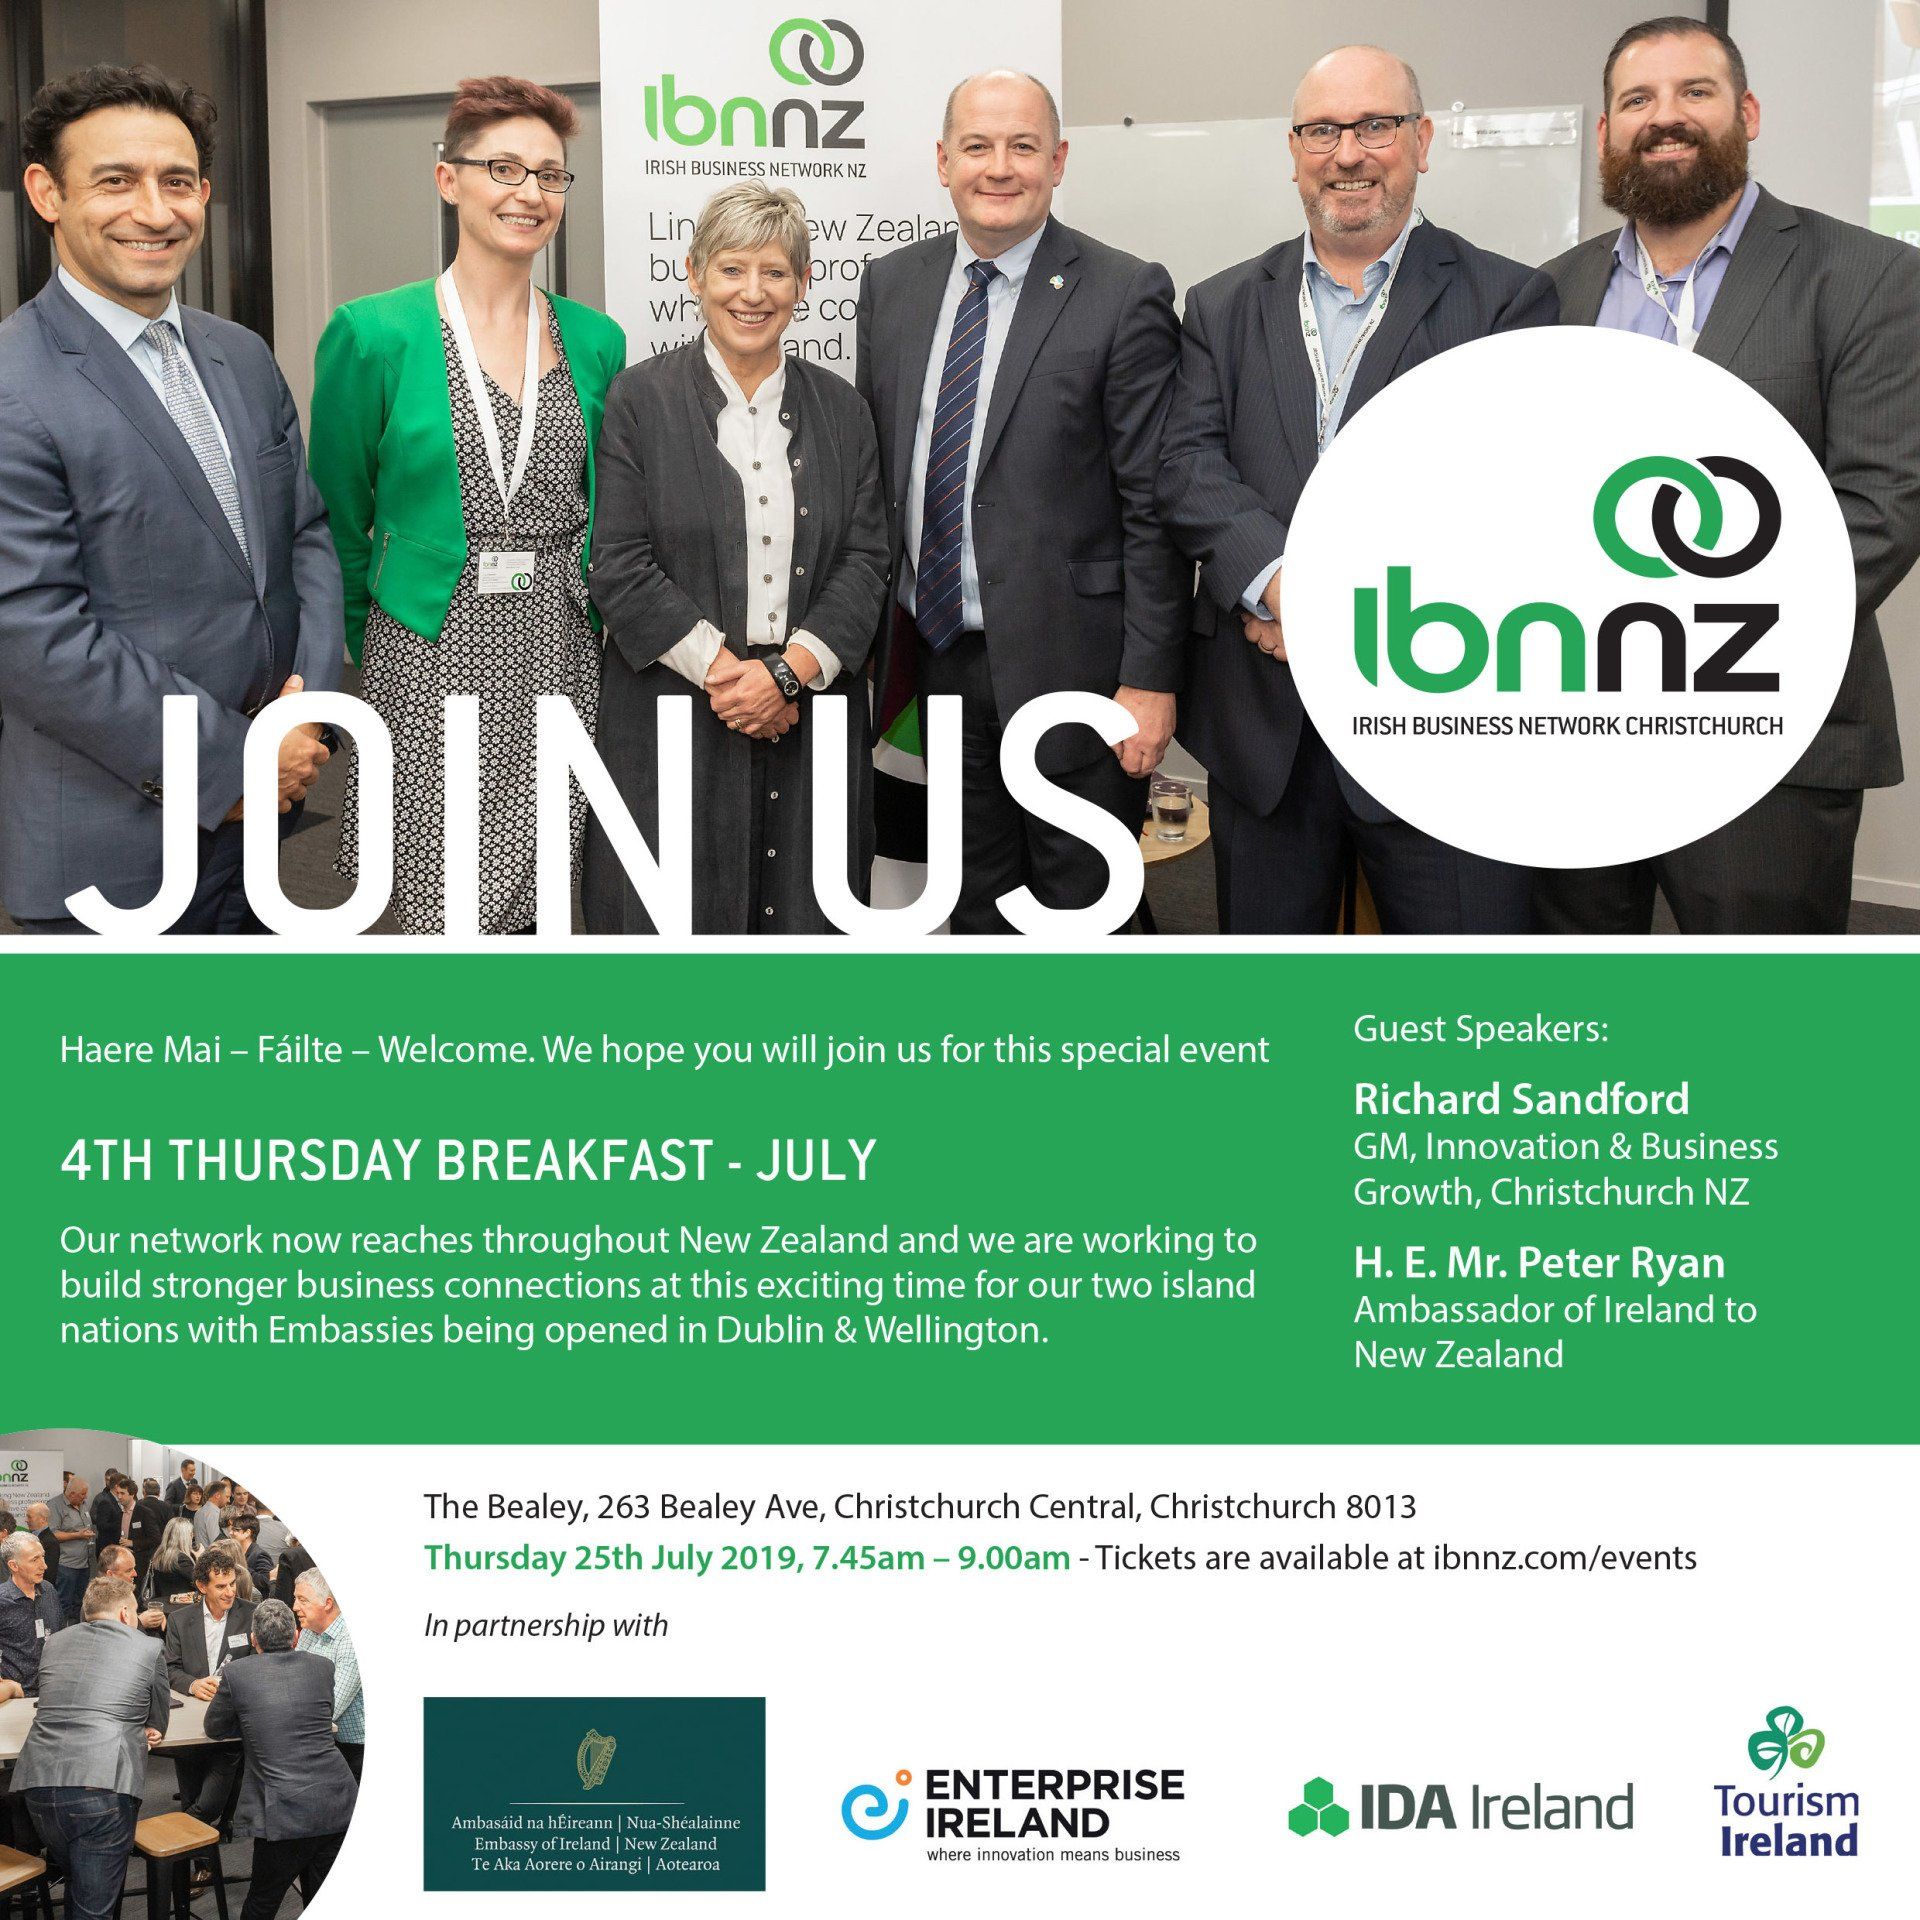 Irish Business Network Events within New Zealand